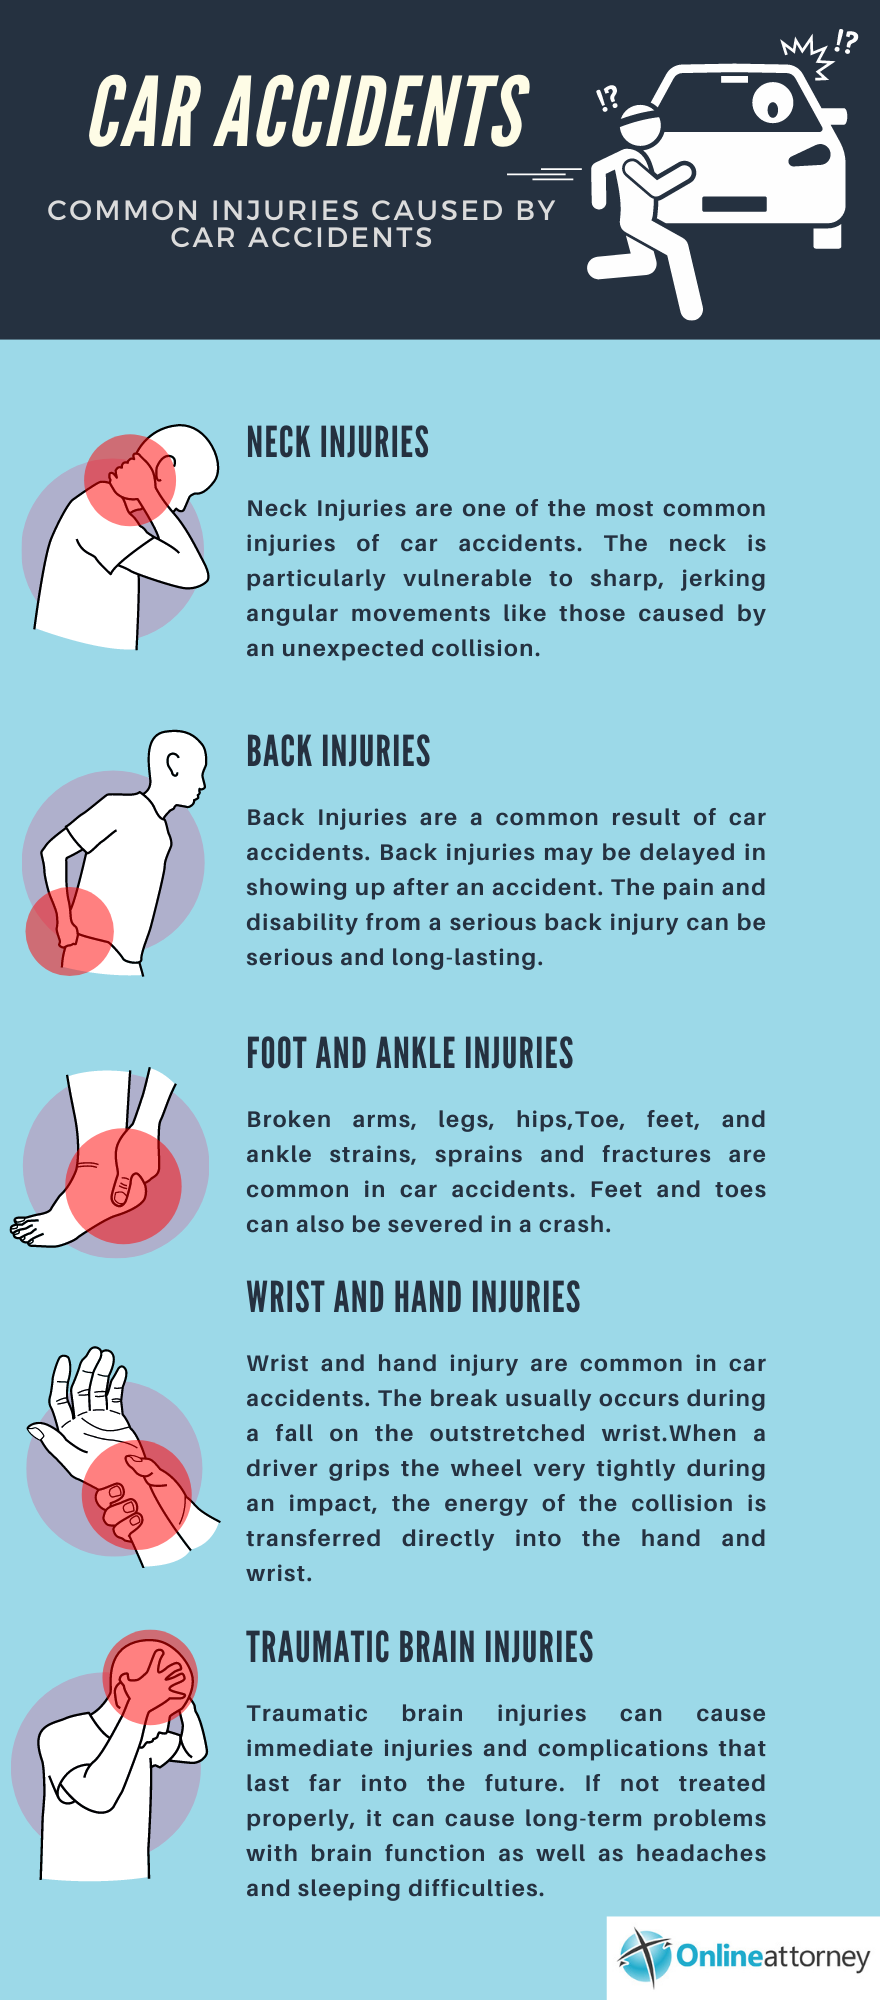 Common injuries caused by car accidents